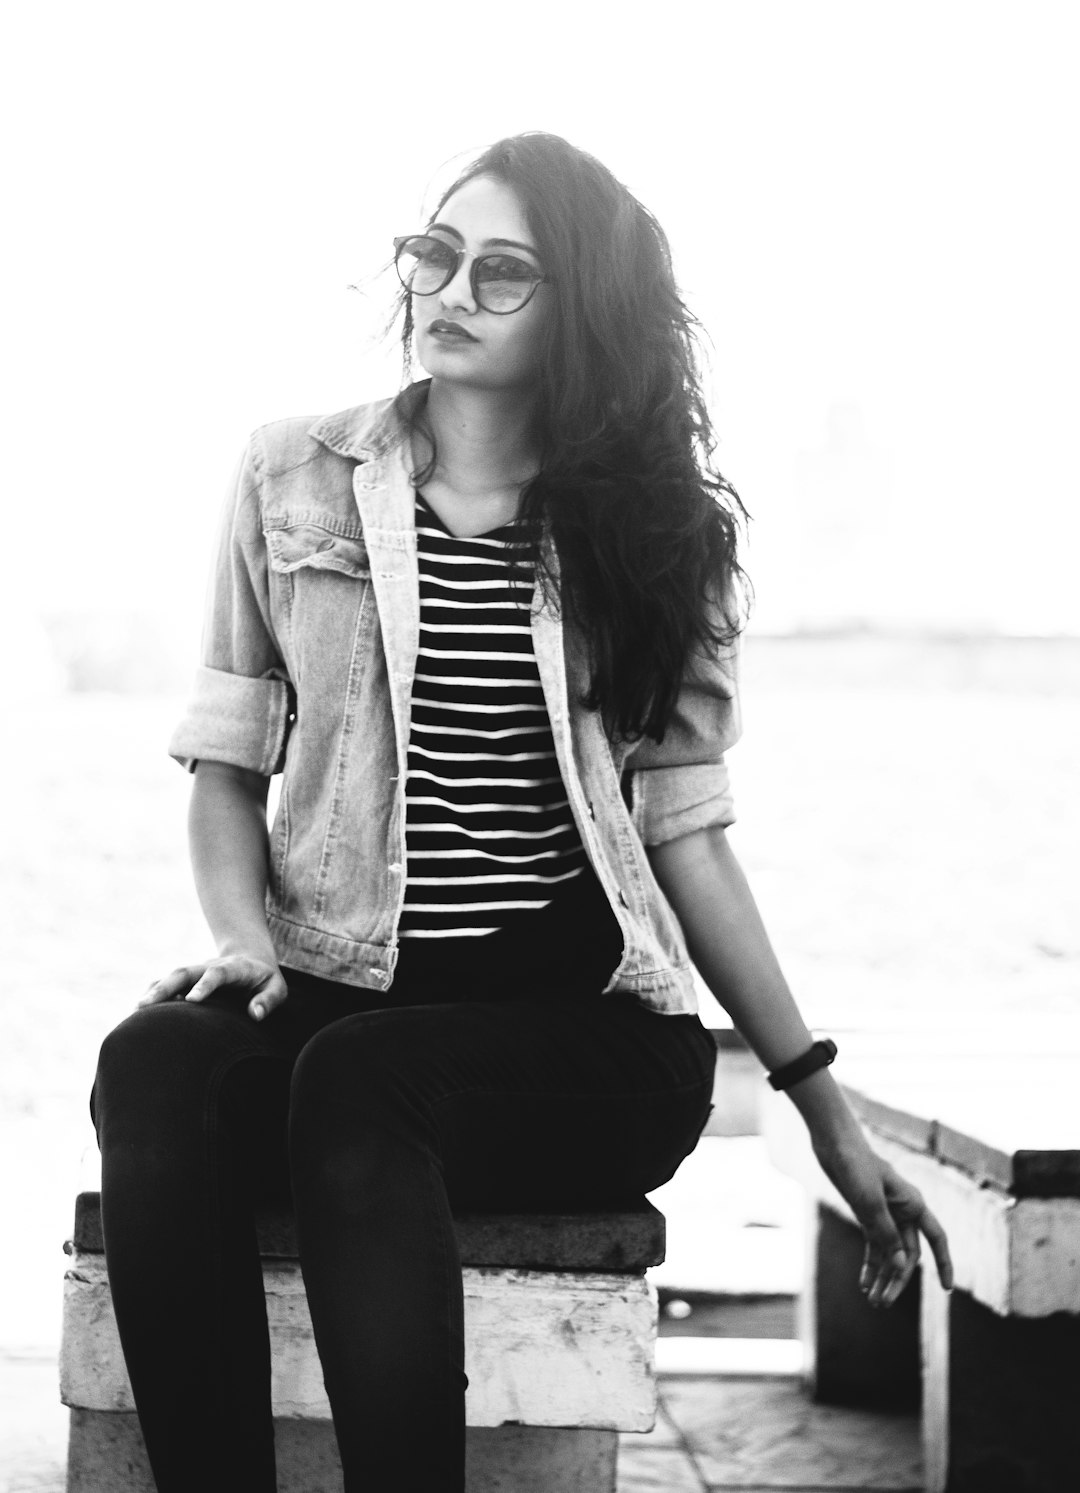 woman in black and white striped shirt and brown coat sitting on concrete bench